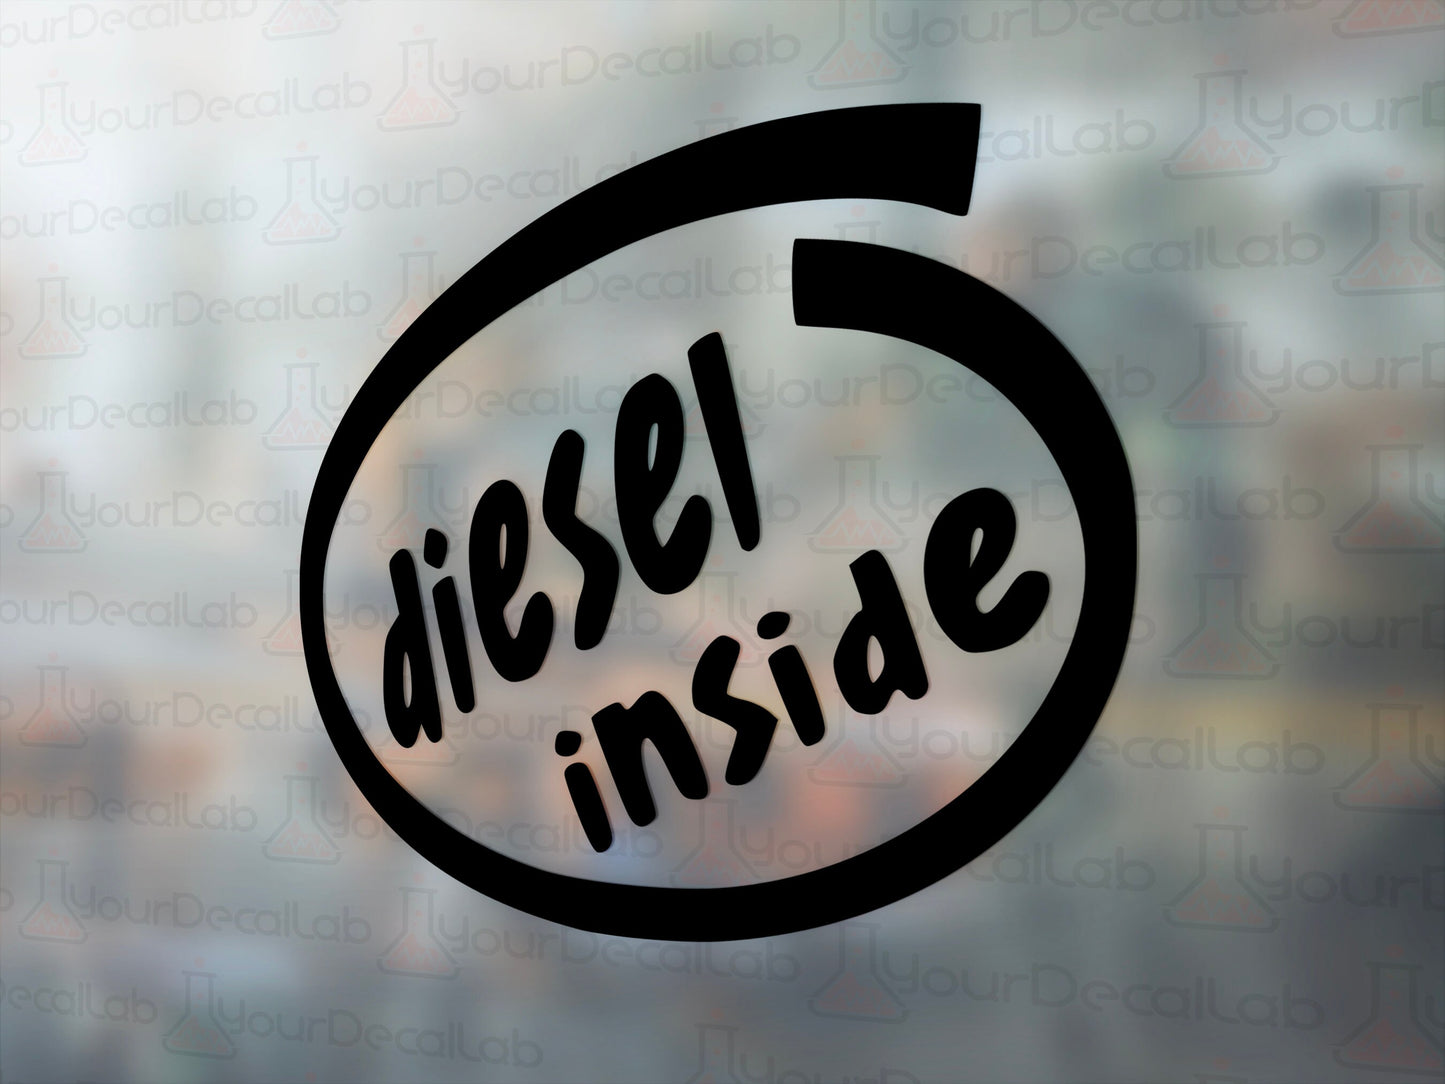 Diesel Inside Decal - Many Colors & Sizes